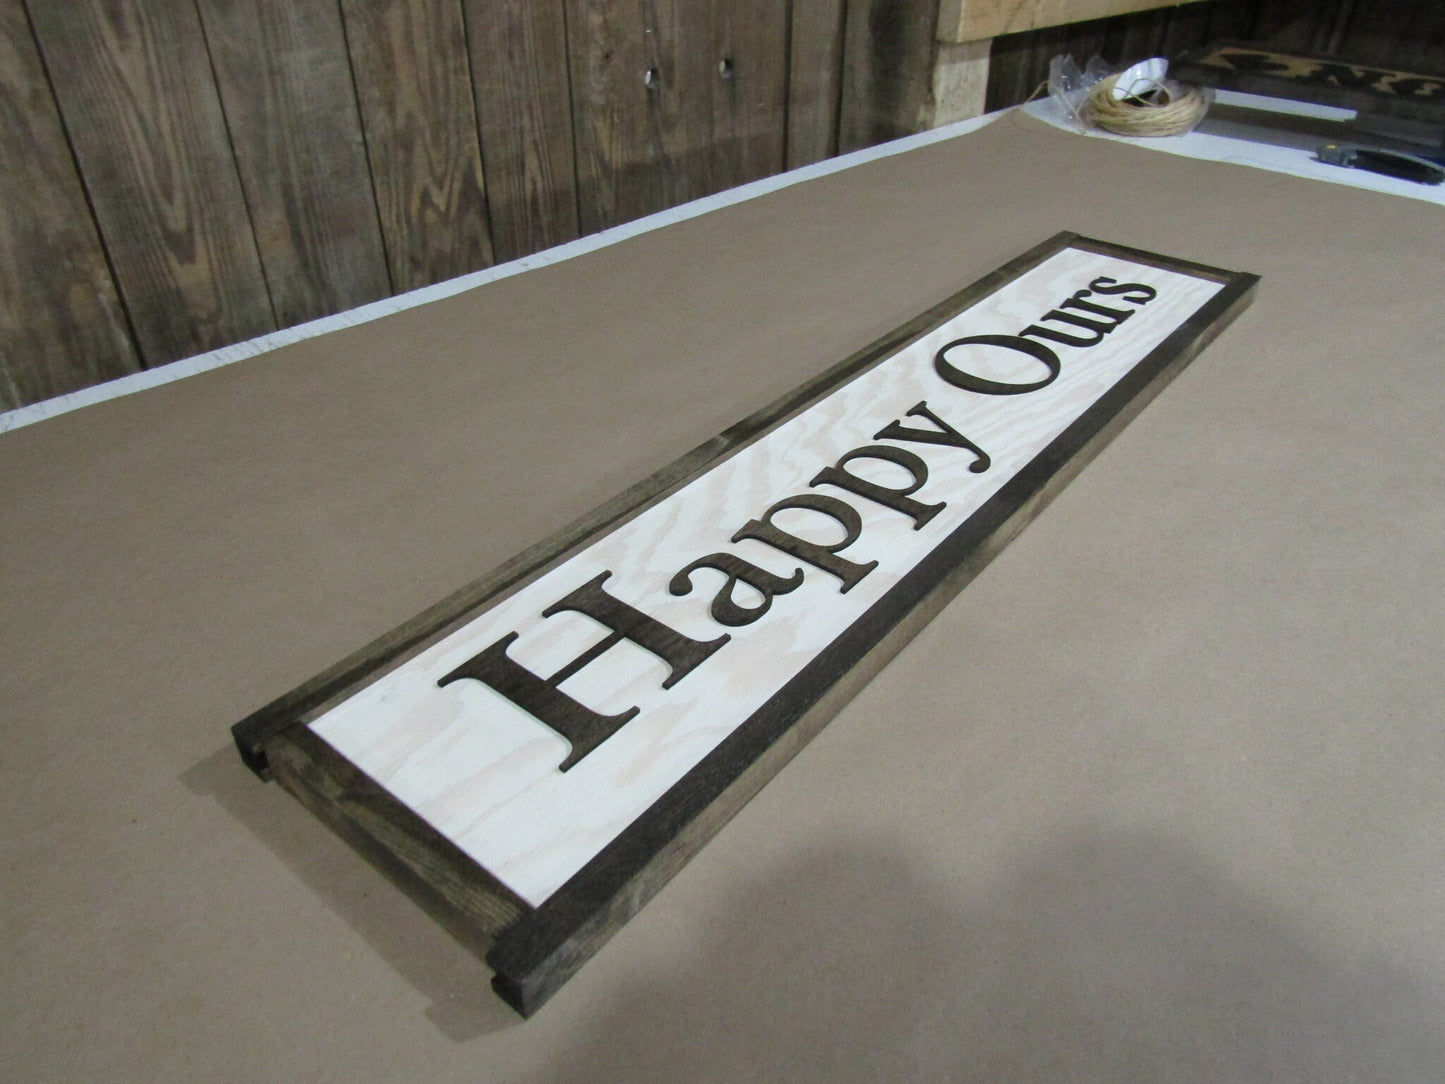 Personalized Wooden Sign Phrase Happy Ours Kitchen House Sign Living Room Custom Rustic Farmhouse Framed Home Decor Handmade 3D Together